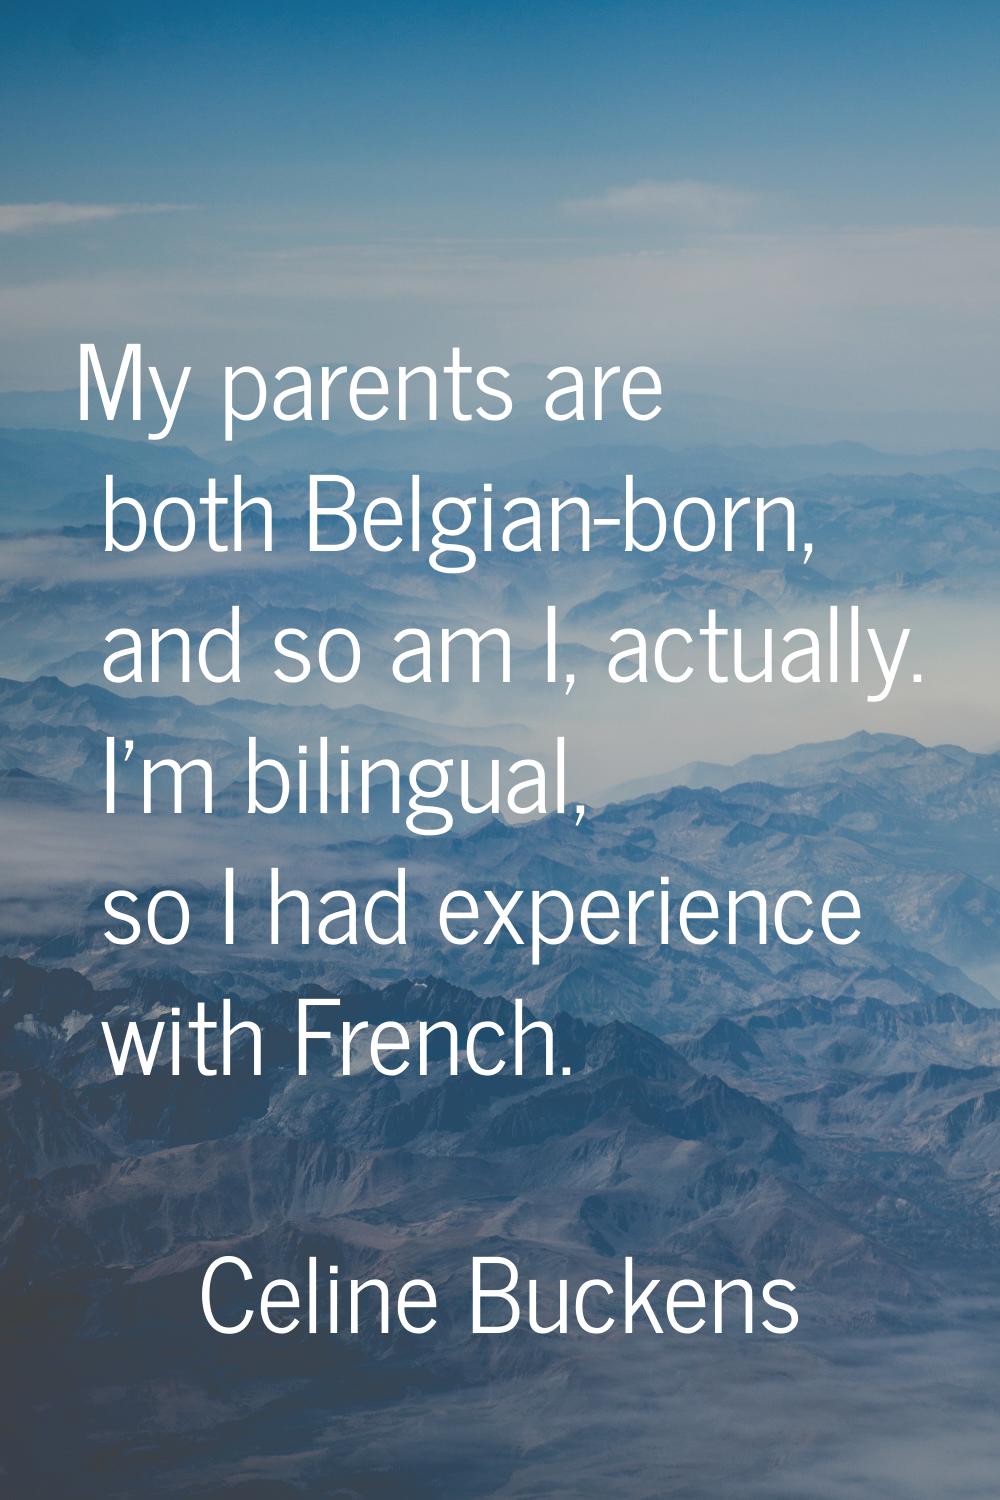 My parents are both Belgian-born, and so am I, actually. I'm bilingual, so I had experience with Fr